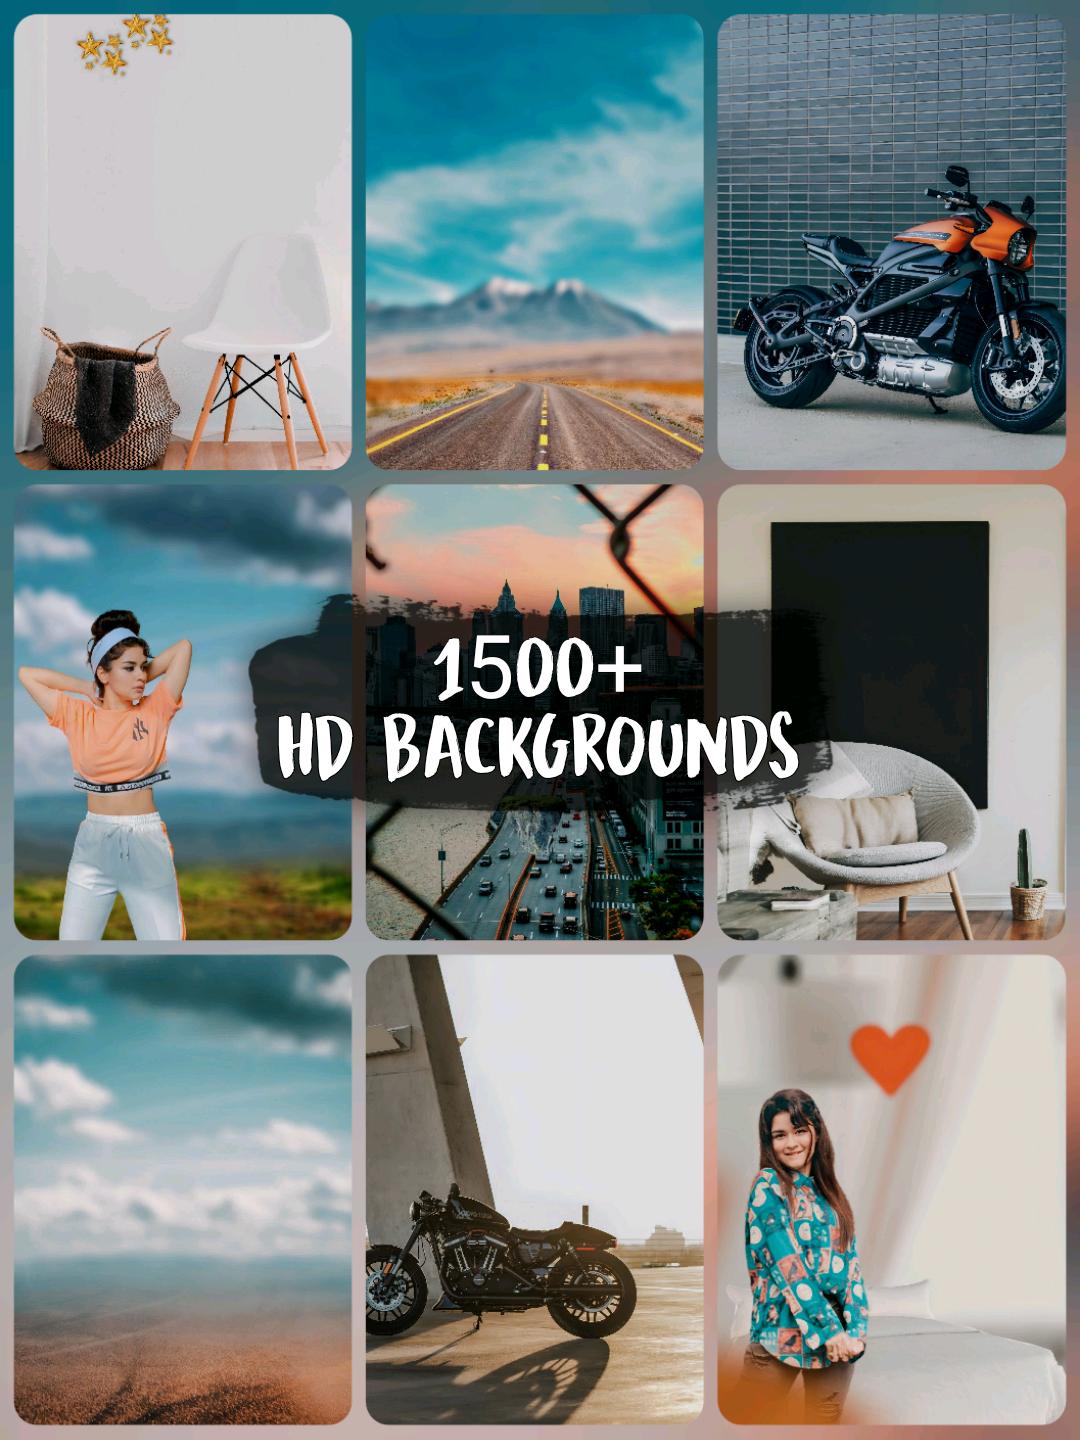 background images hd for editing